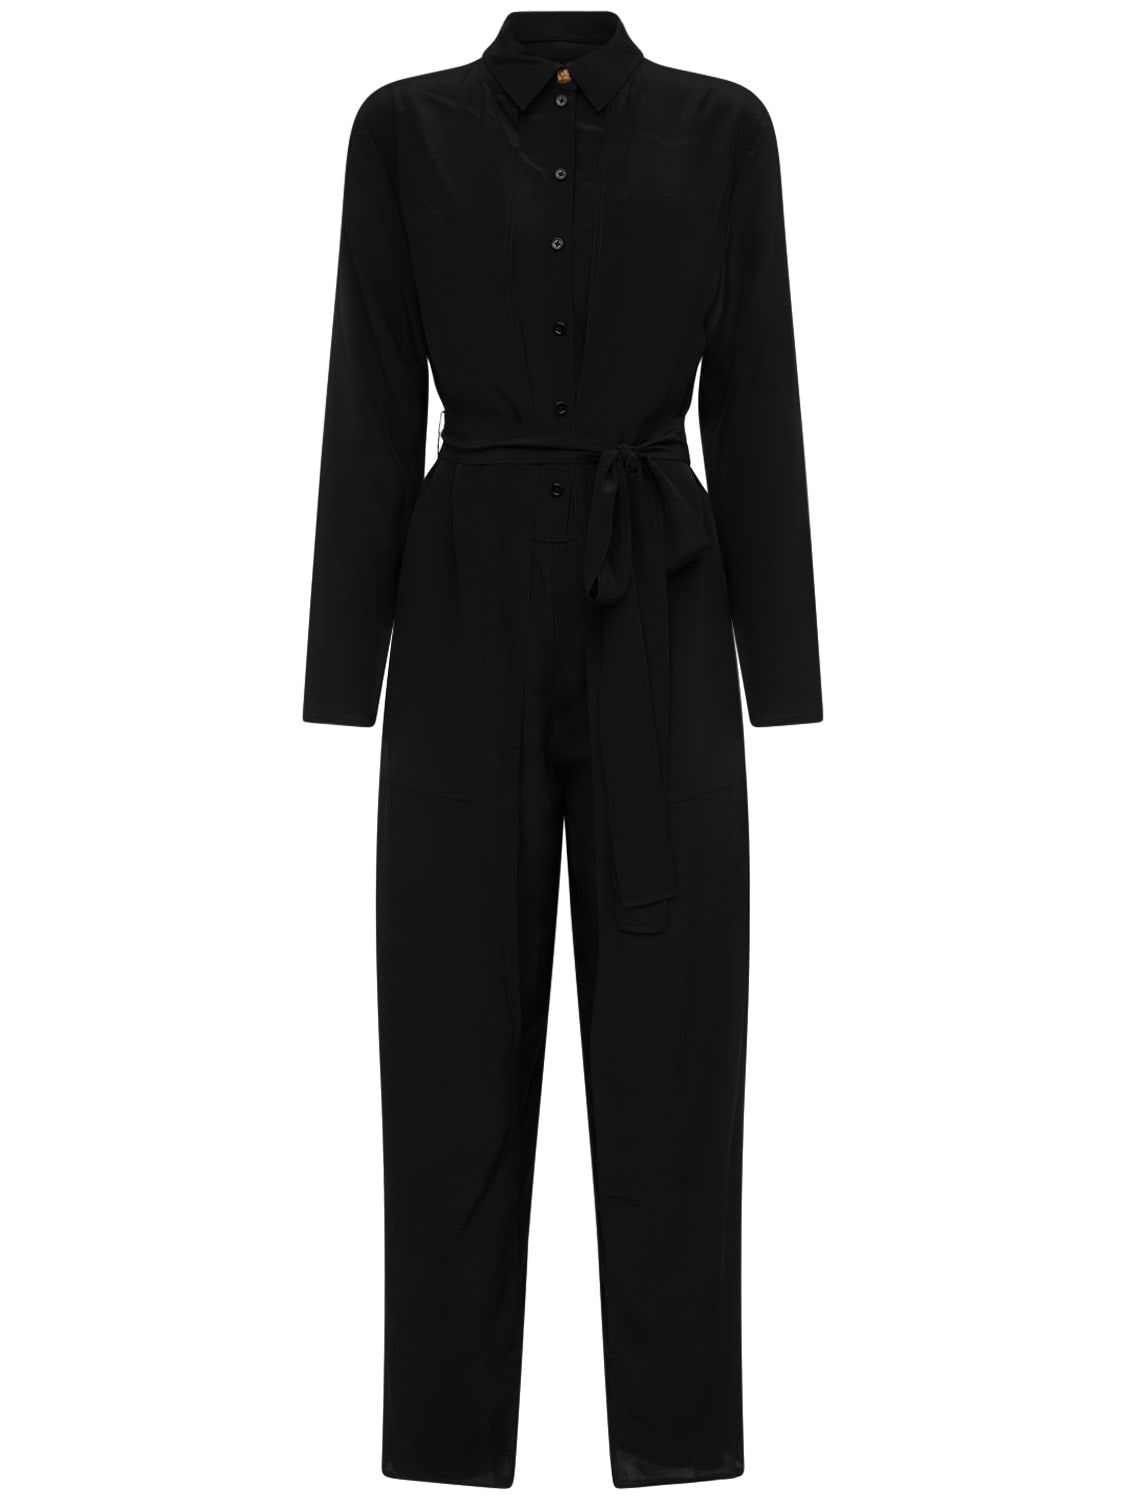 MARC JACOBS Layered Silk Jumpsuit